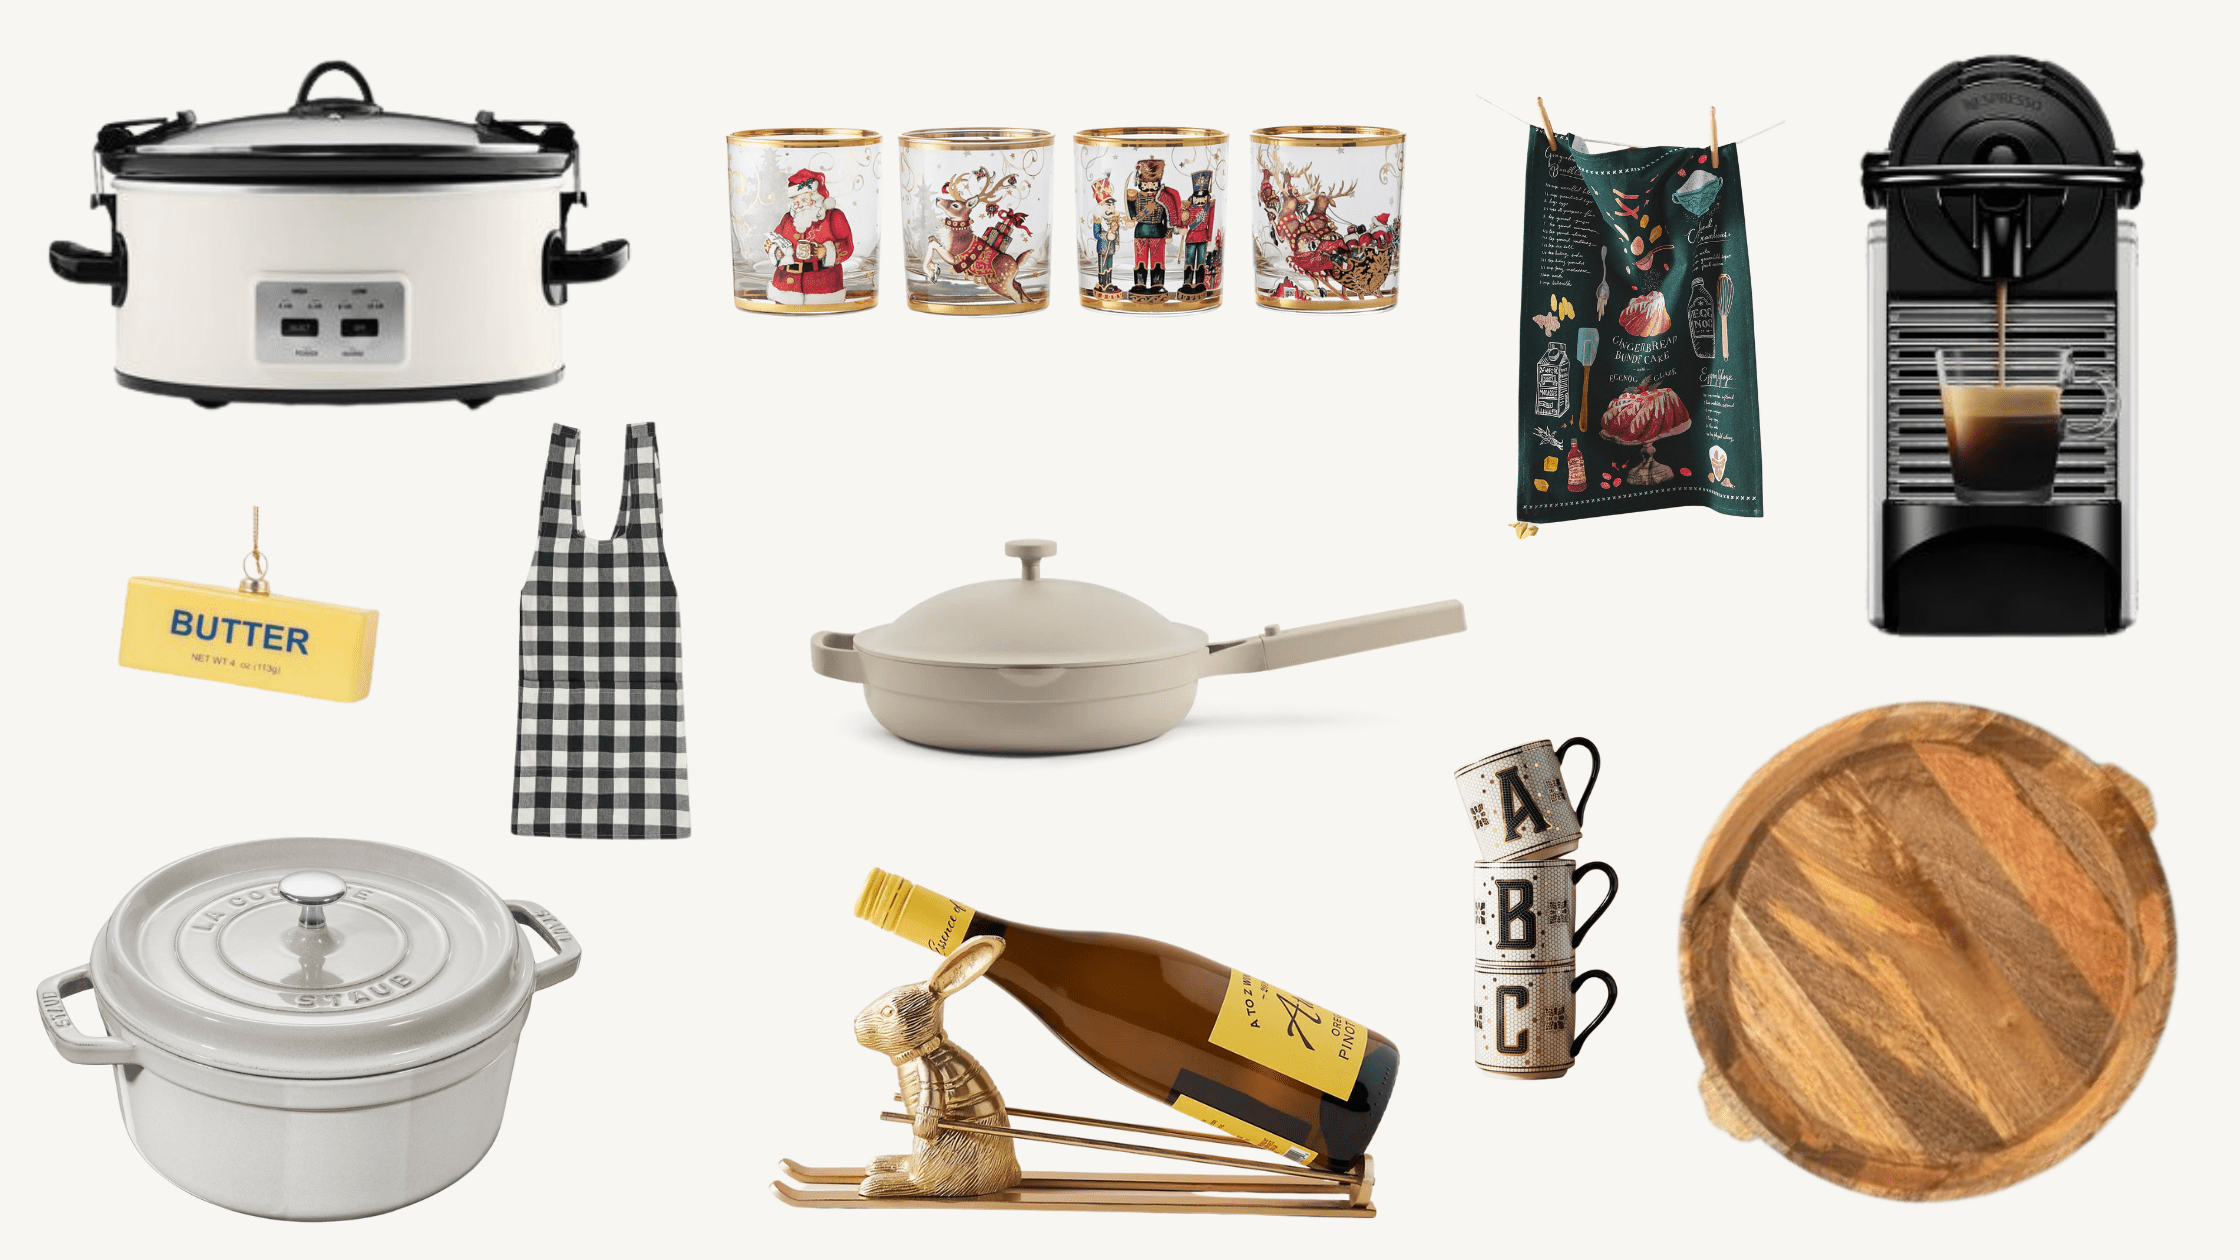 A collection of images of holiday themed gifts for foodies